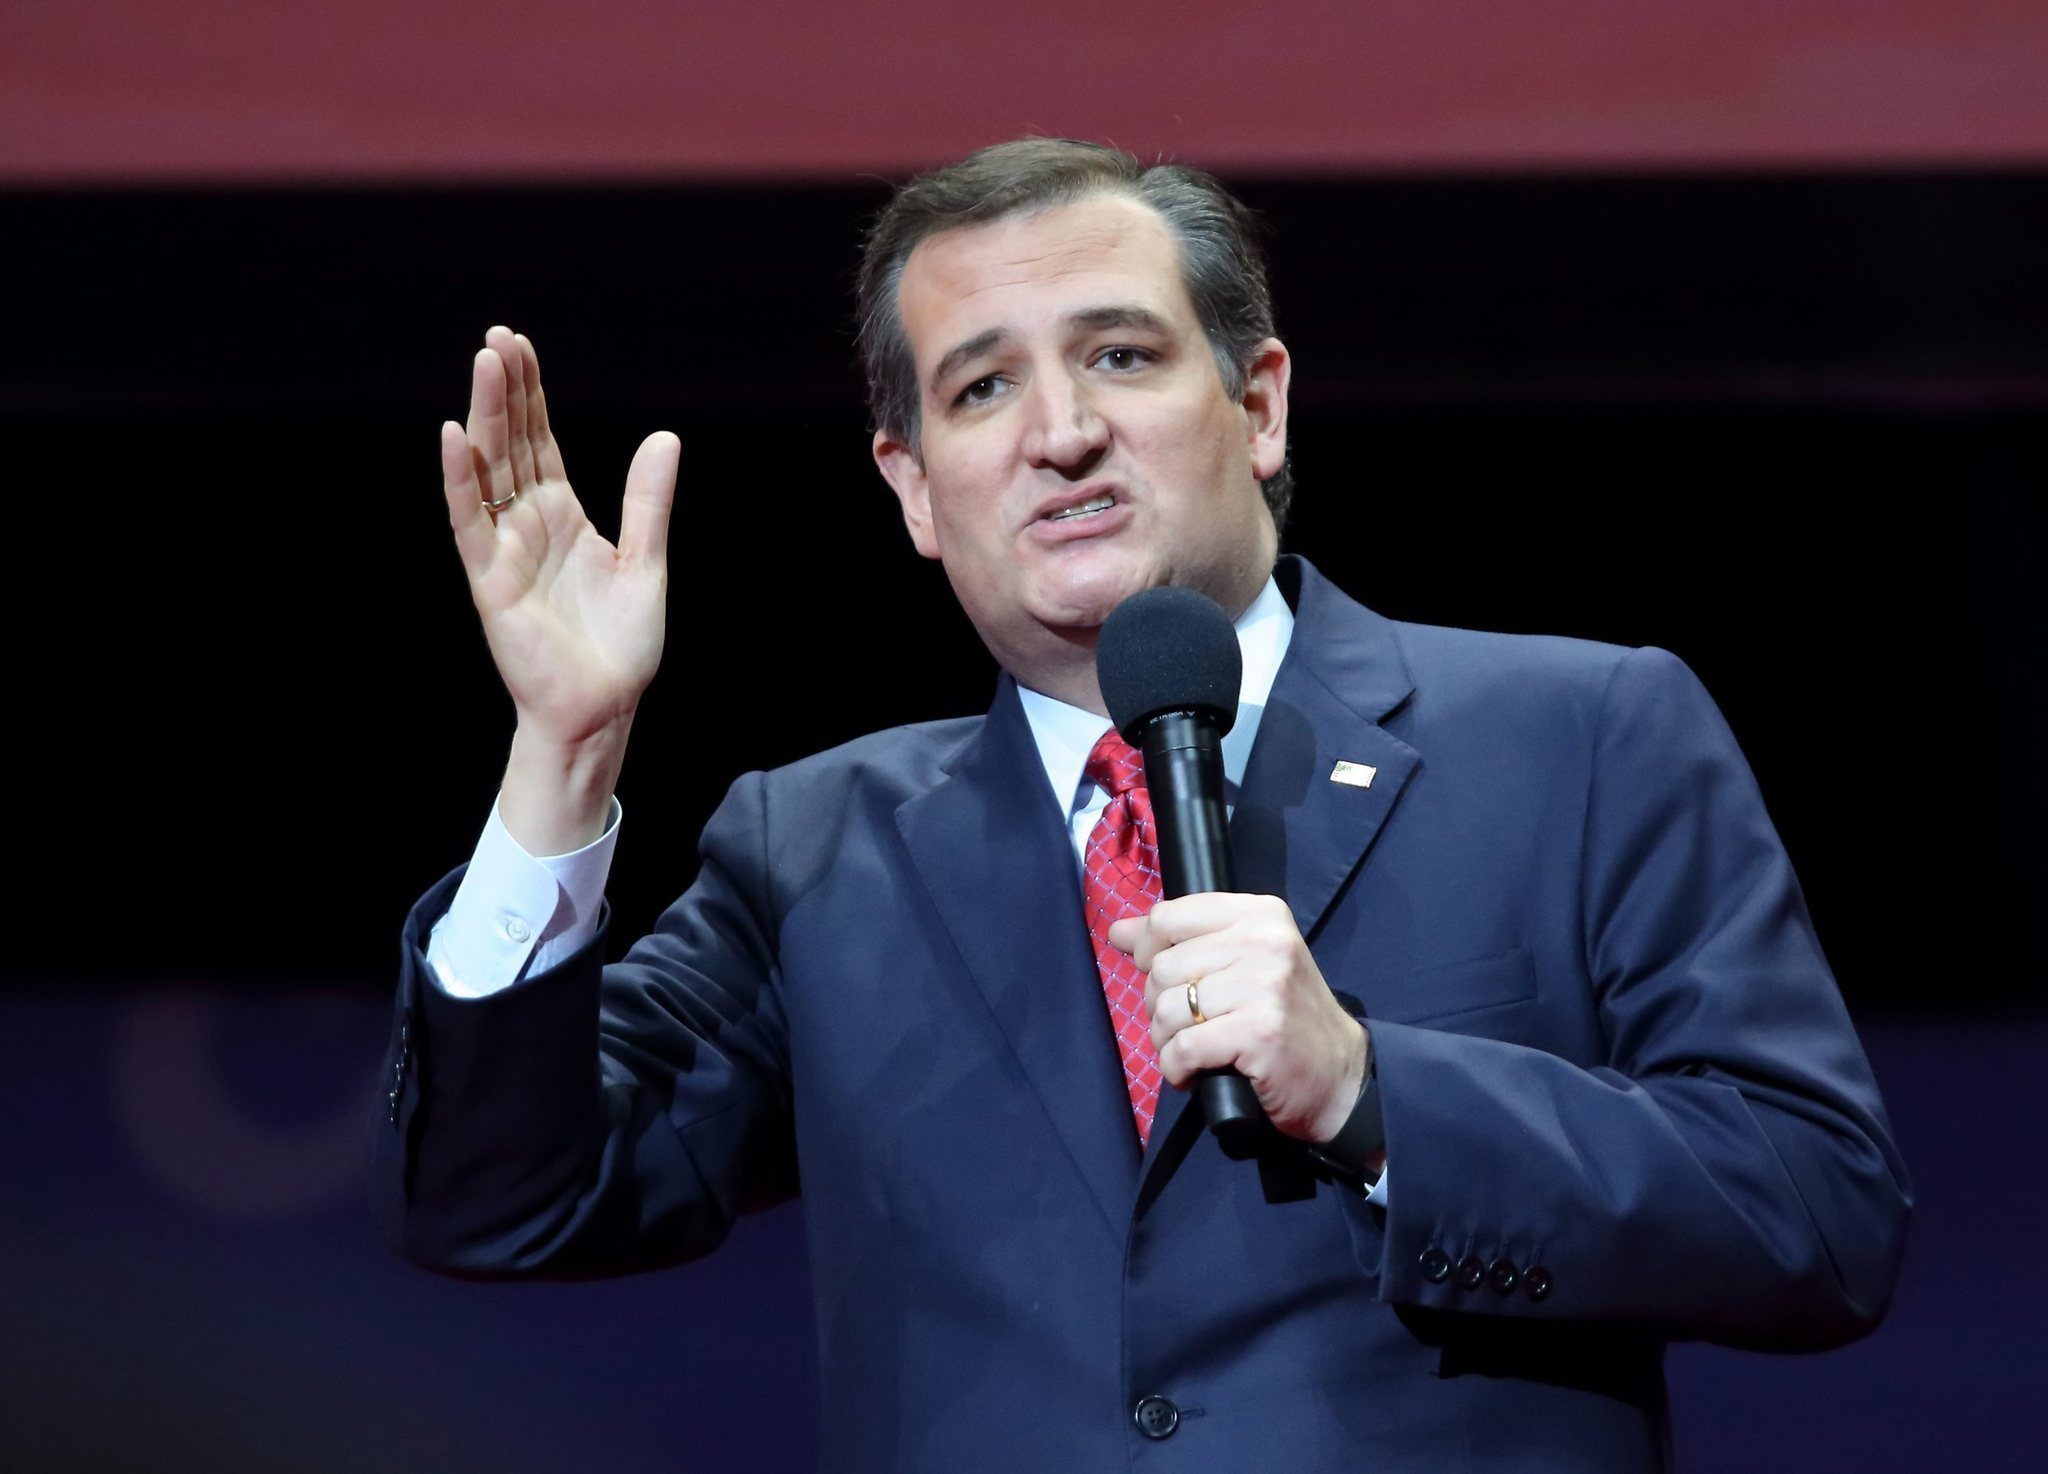 Ted Cruz birther lawsuit makes it to Cook County courtroom - Chicago Tribune2048 x 1474